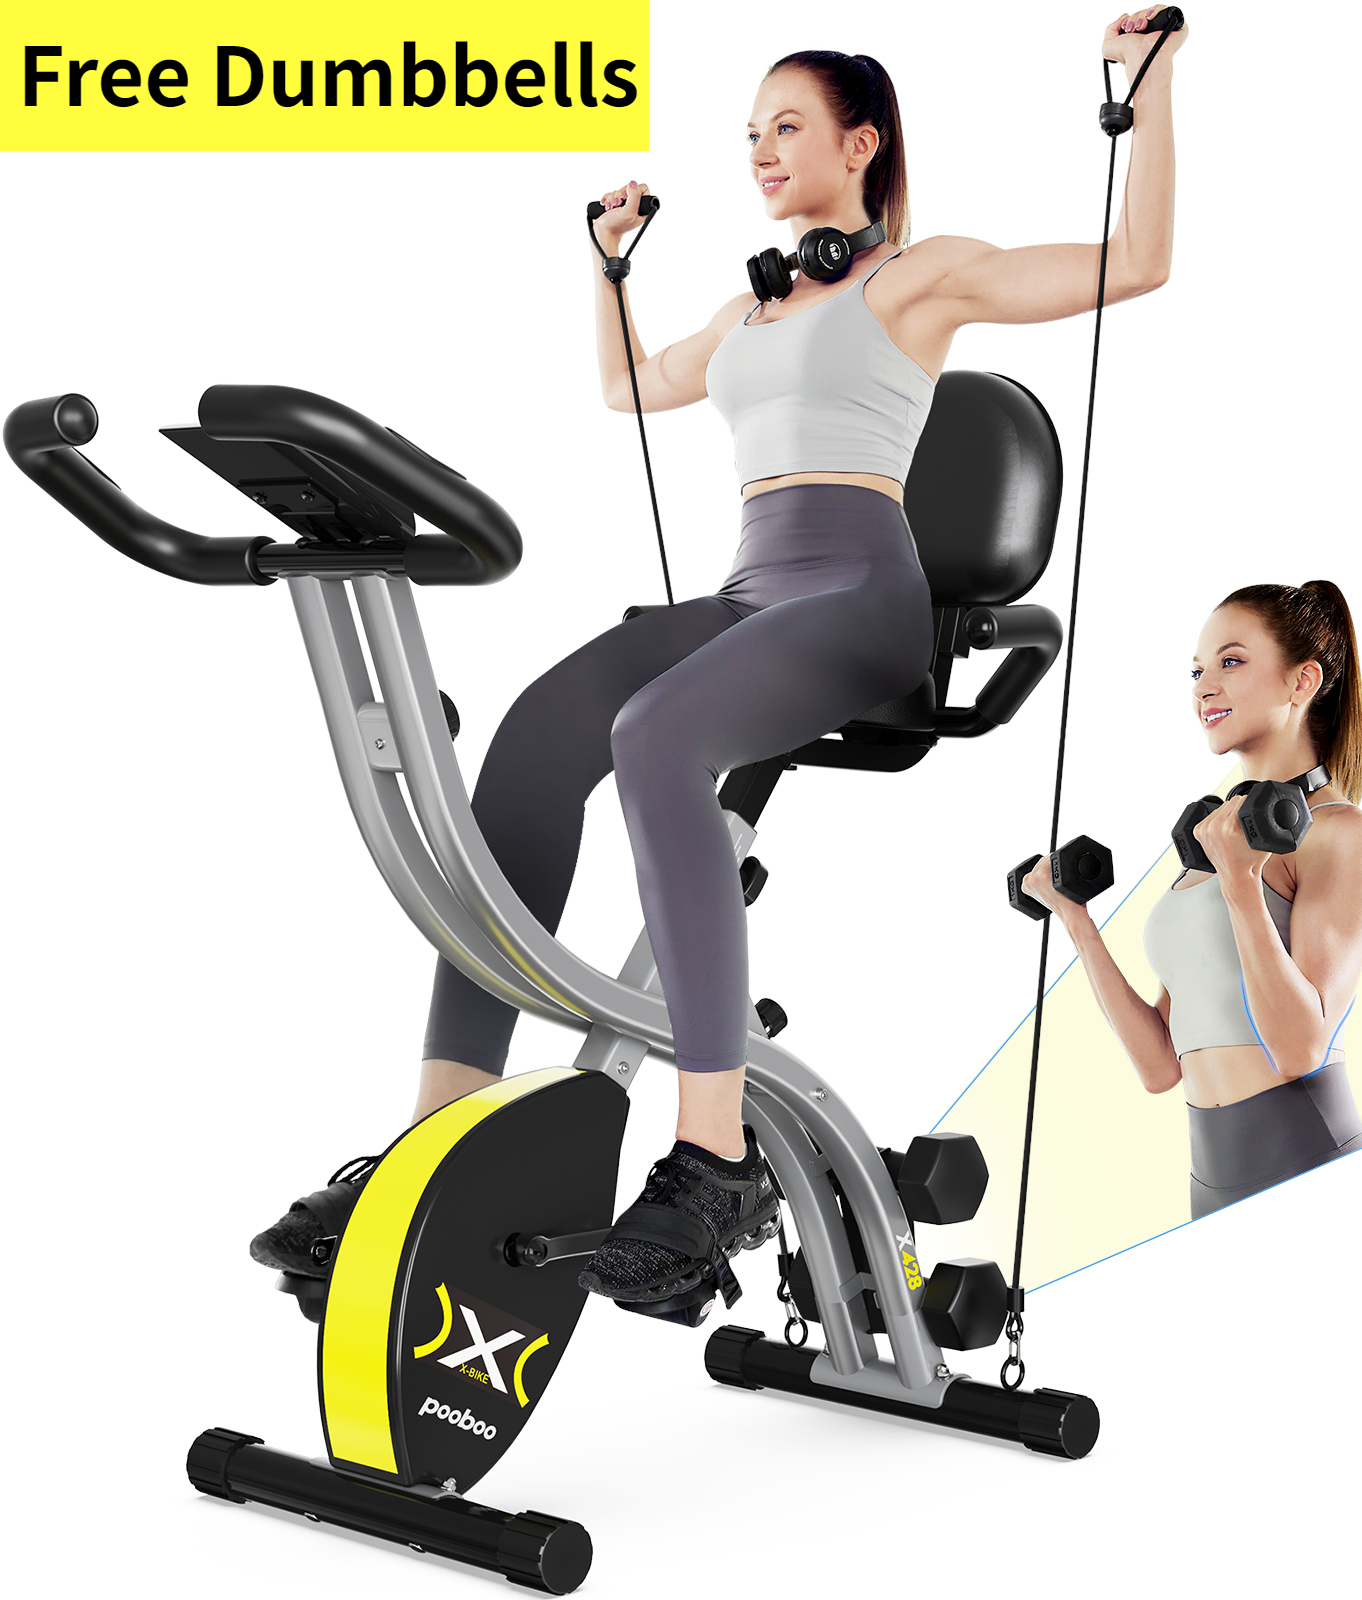 Pooboo Exercise Bike Folding Stationary Cycling Bicycle Indoor Upright Recumbent Exercise Bike with LCD Monitor Maximum Weight 300lb - image 1 of 6